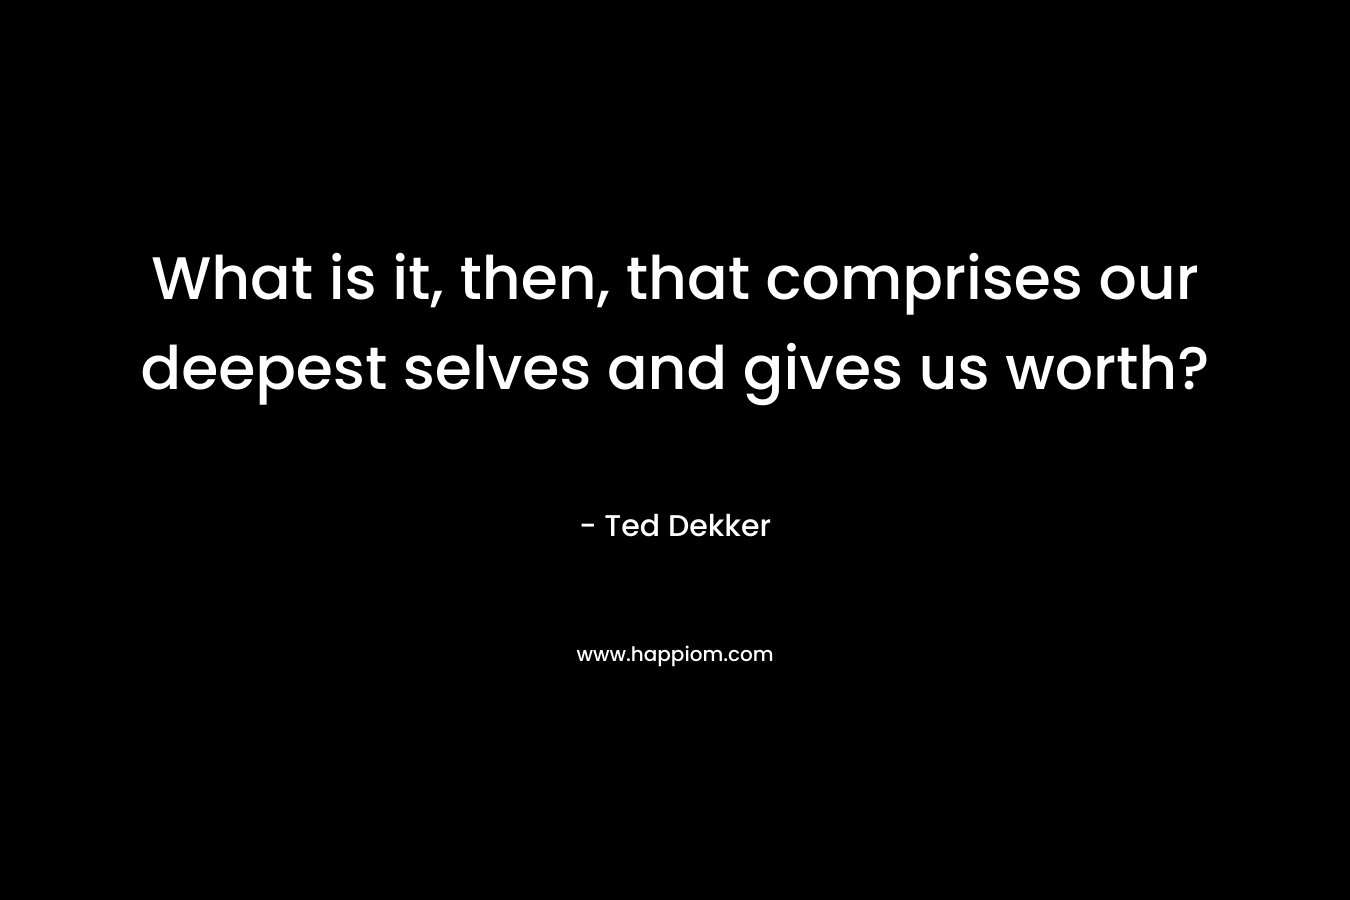 What is it, then, that comprises our deepest selves and gives us worth? – Ted Dekker